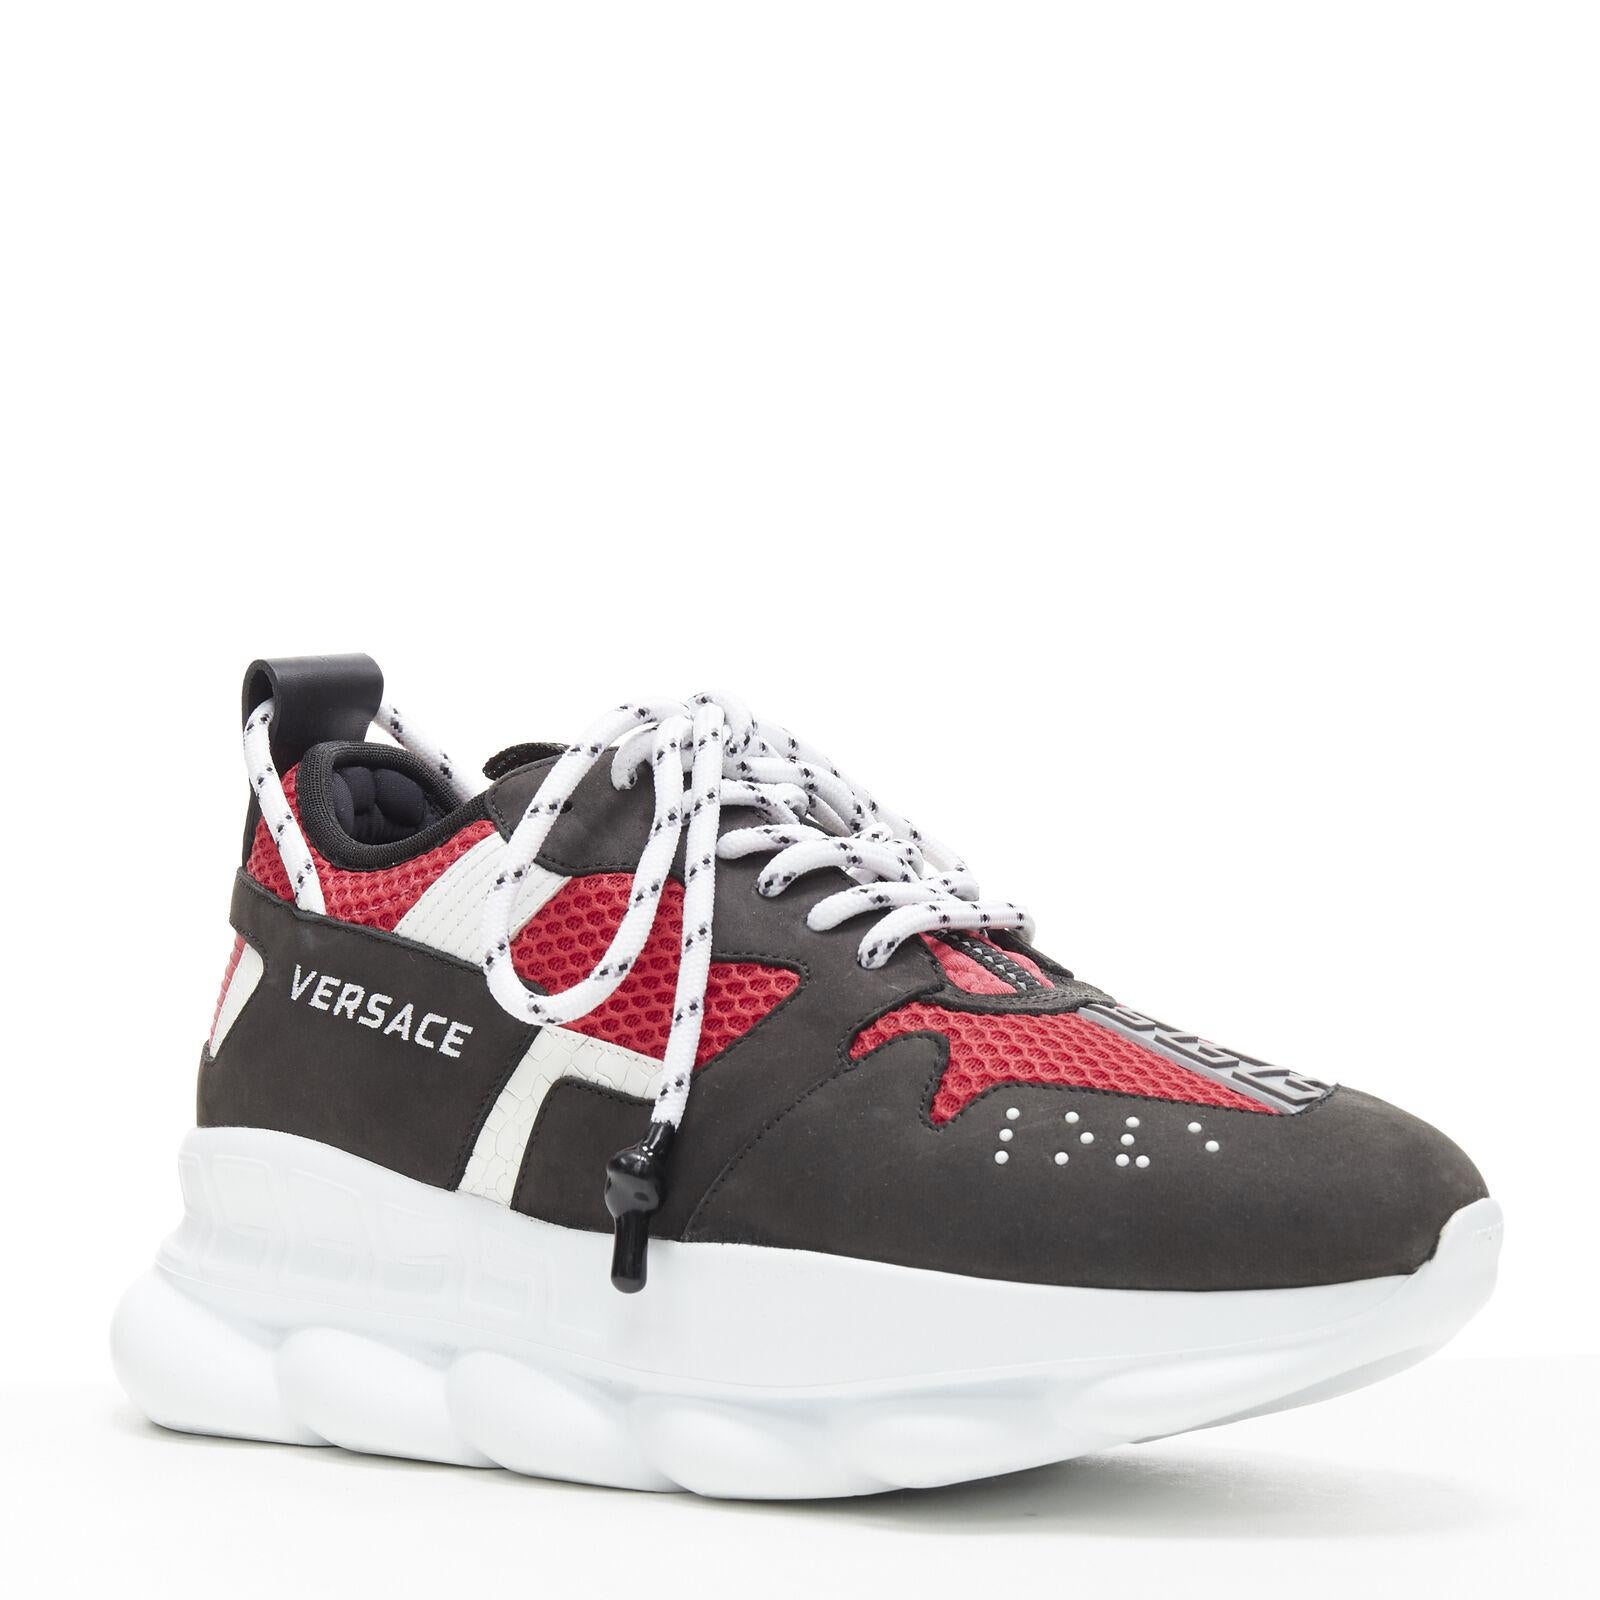 new VERSACE Chain Reaction Black Red suede low top chunky sneaker EU38.5 US5.5
Reference: TGAS/B01154
Brand: Versace
Designer: Donatella Versace
Model: Versace Chain Reaction
Material: Fabric, Leather
Color: Black, Red
Pattern: Solid
Closure: Lace